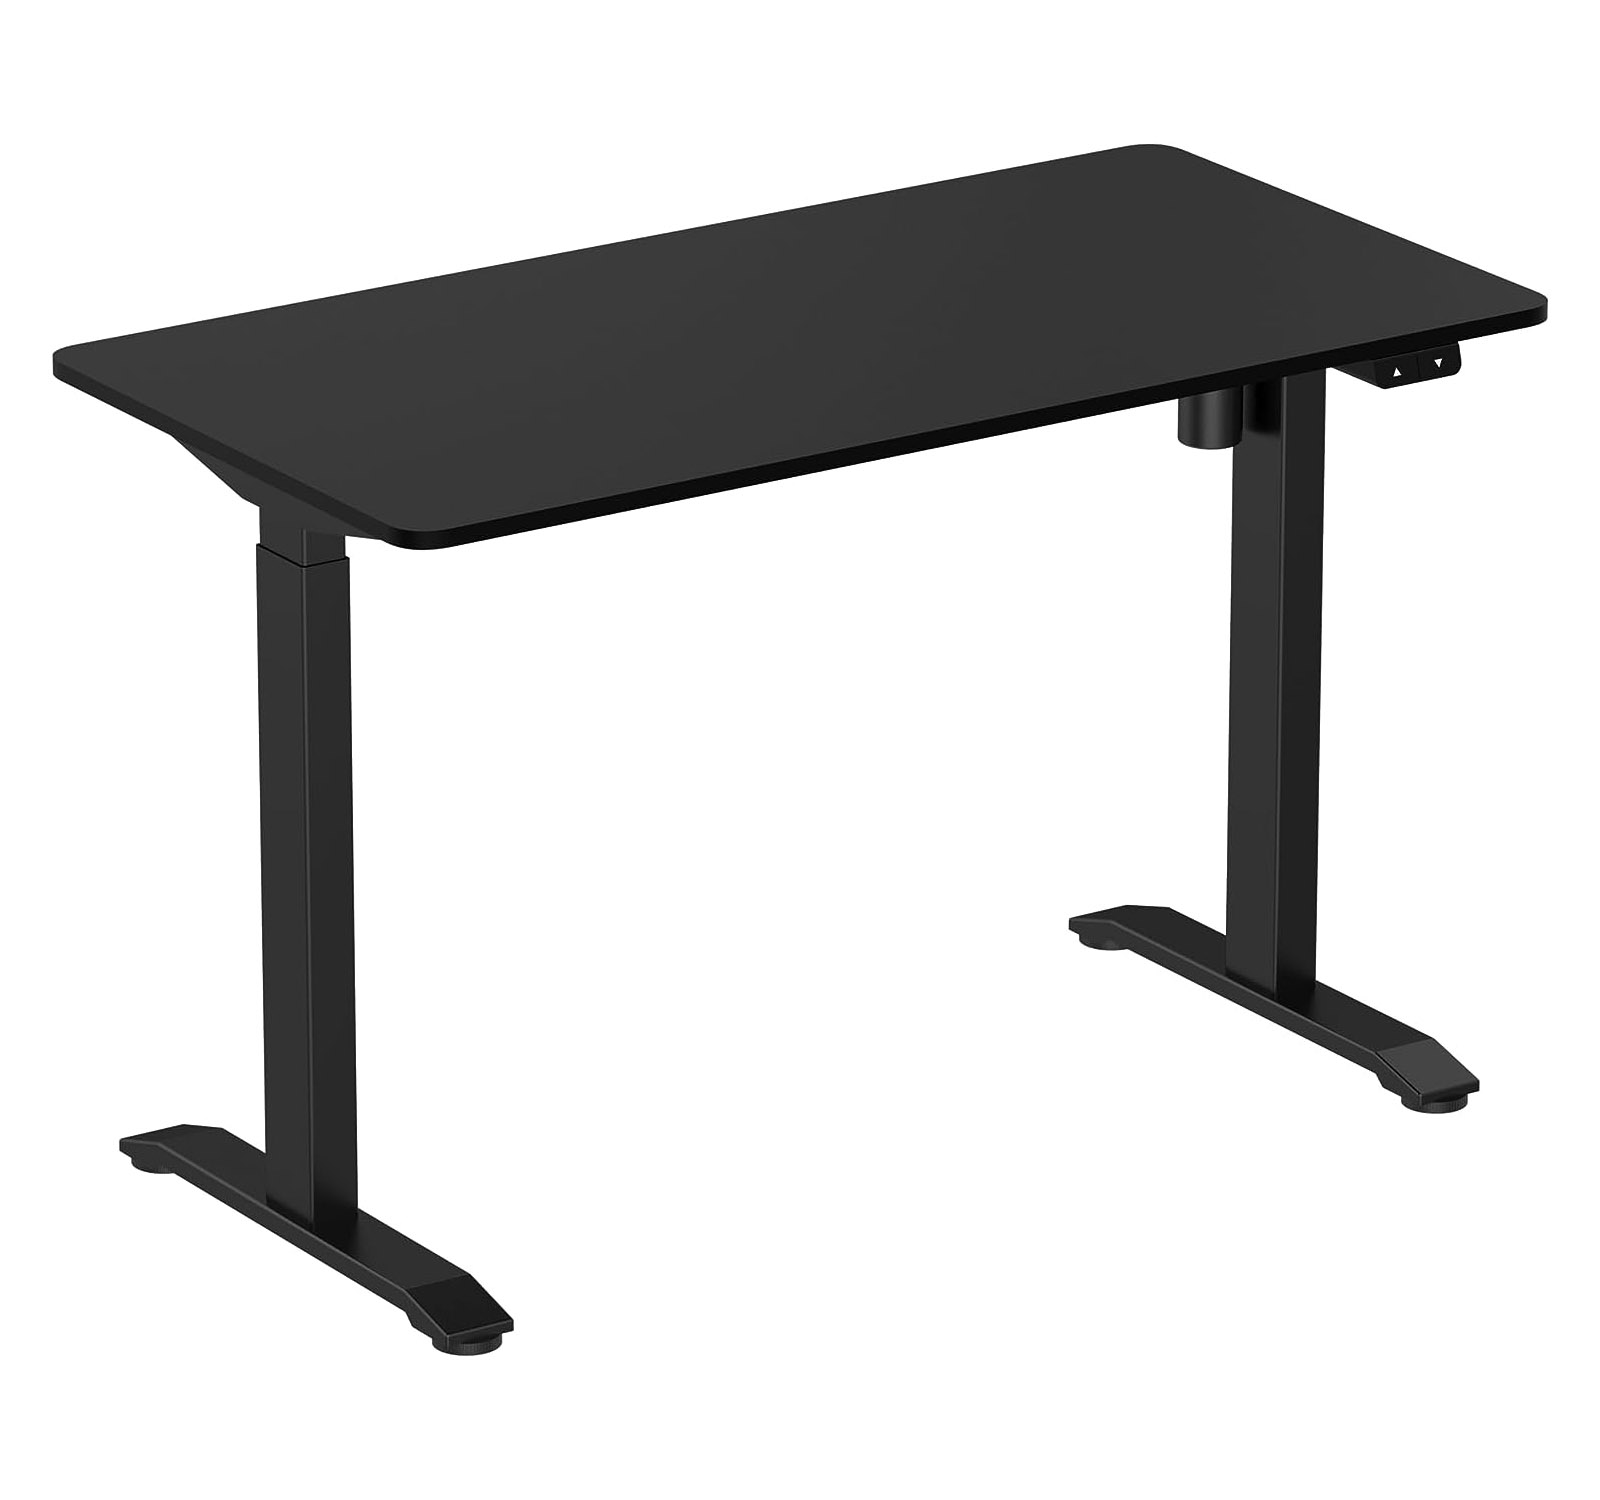 O'BELB Ergonomic Sit and Stand Electric Table (Black Colour)